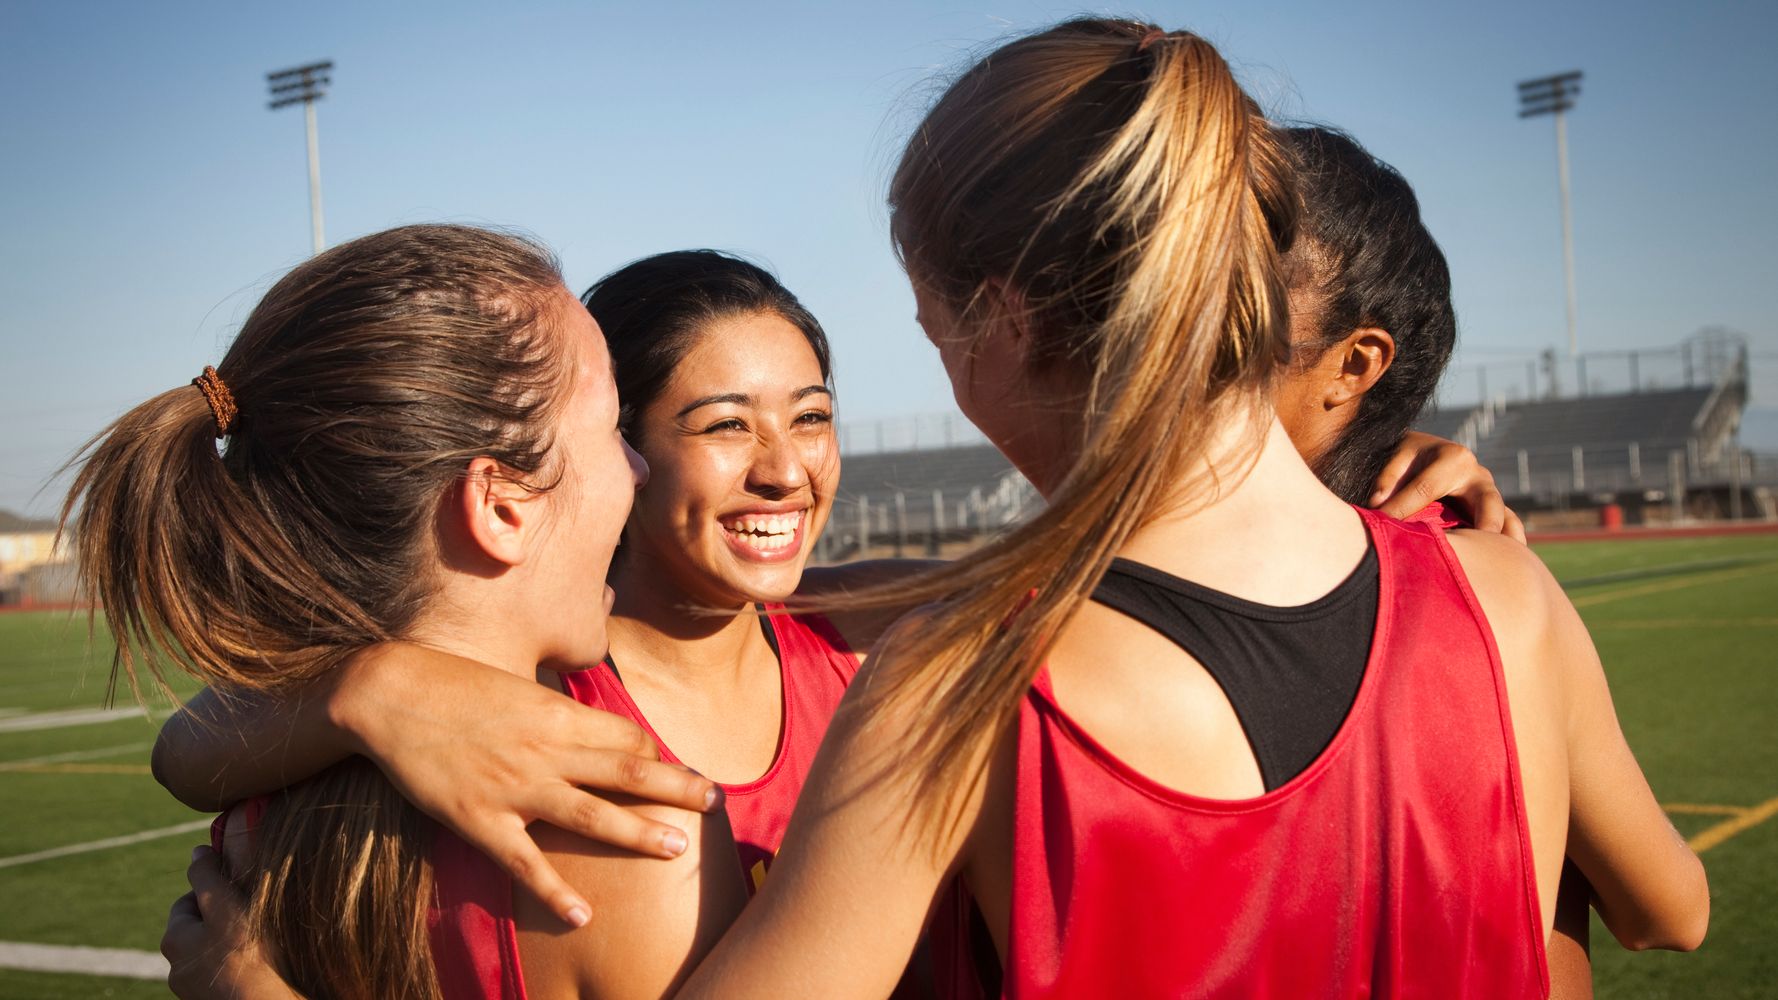 Many Teenage Girls Are Skipping Sports Because Of Their Boobs